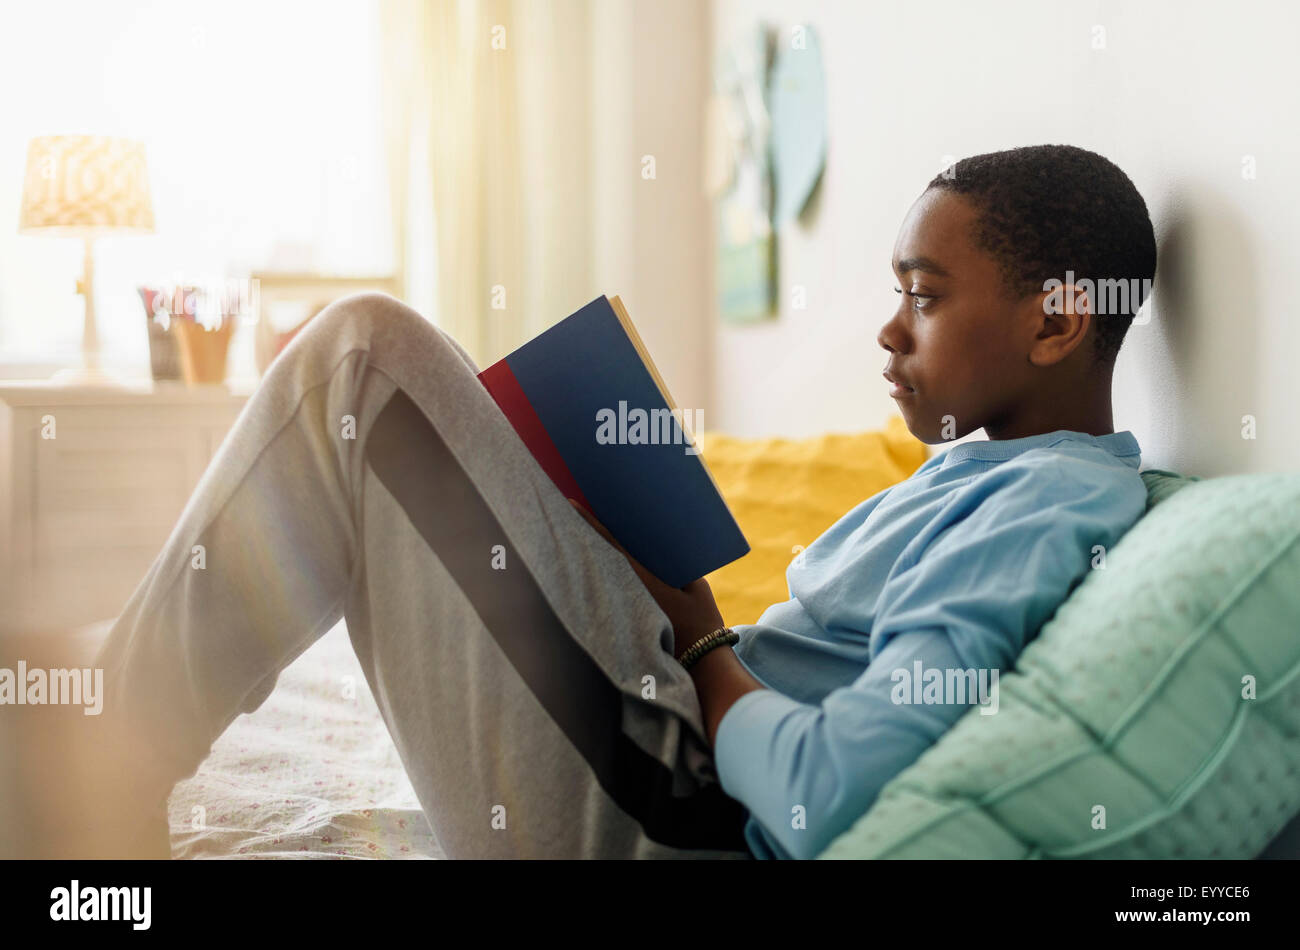 Black boy reading book on bed Stock Photo